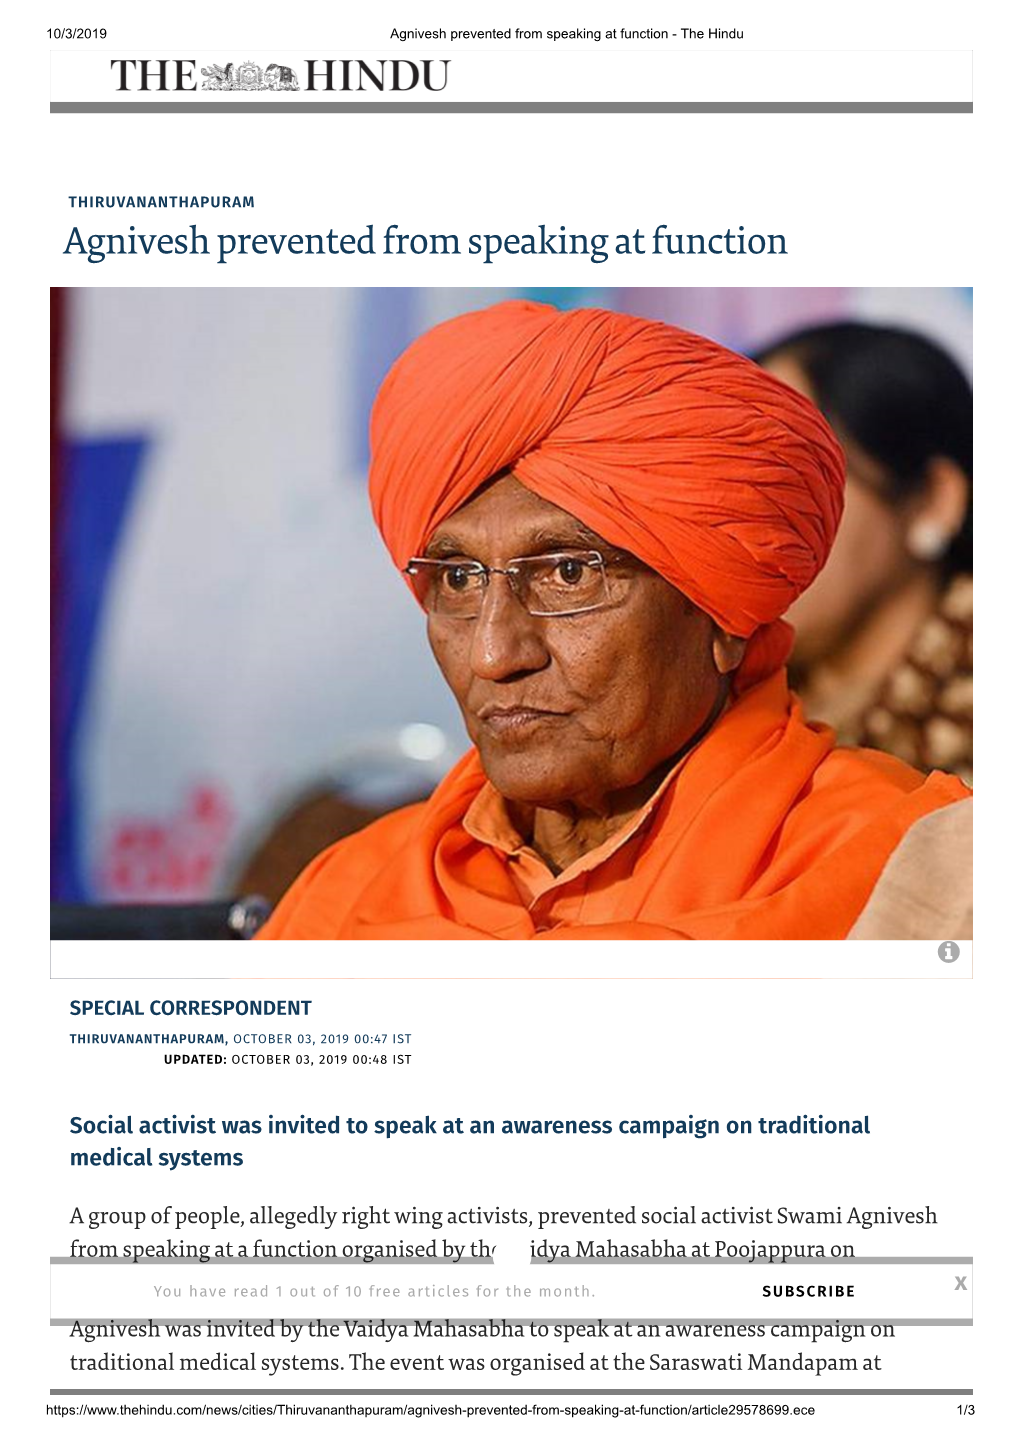 Agnivesh Prevented from Speaking at Function - the Hindu